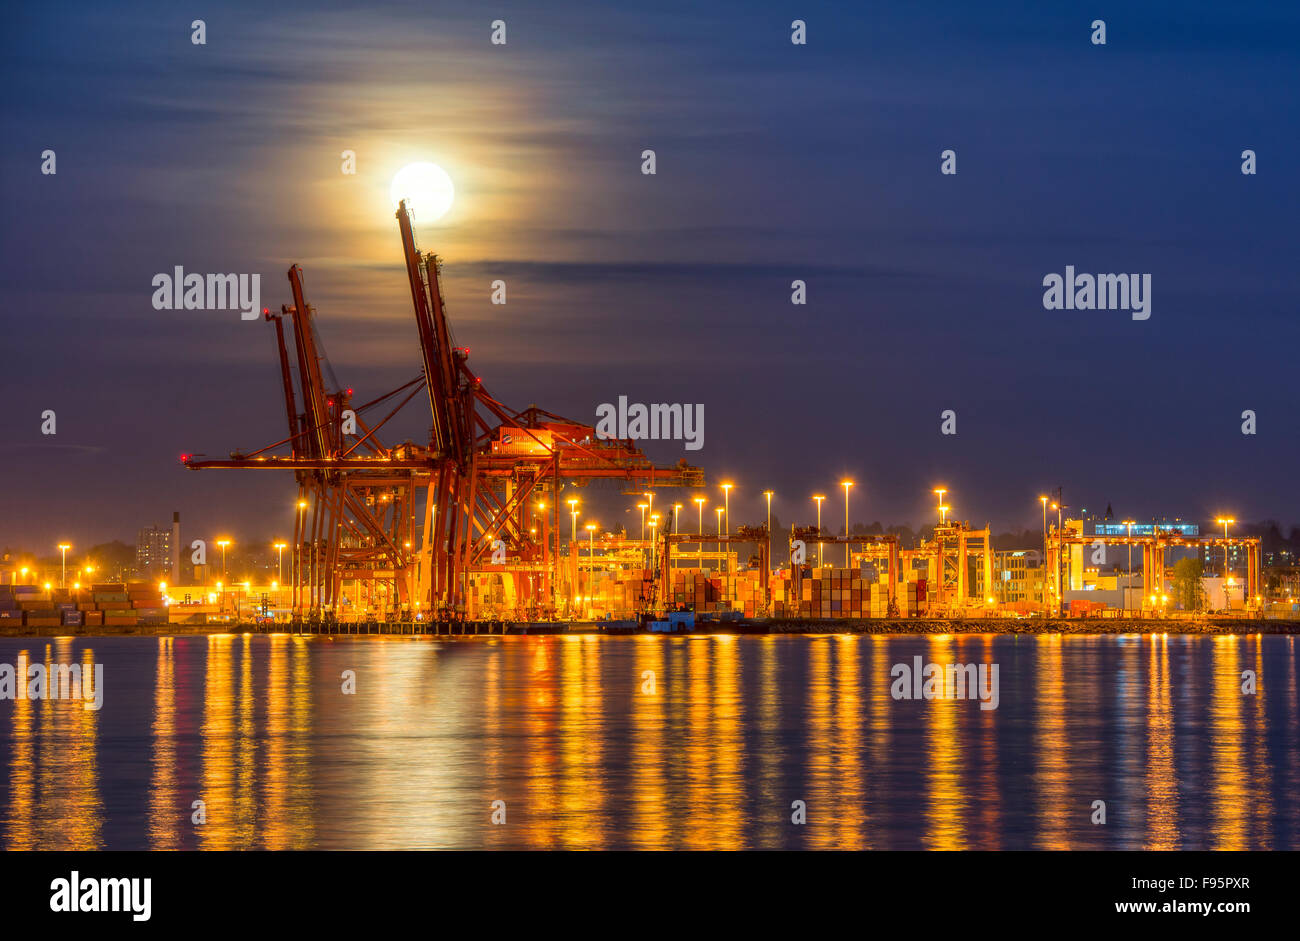 Moonrise over container cranes Stock Photo